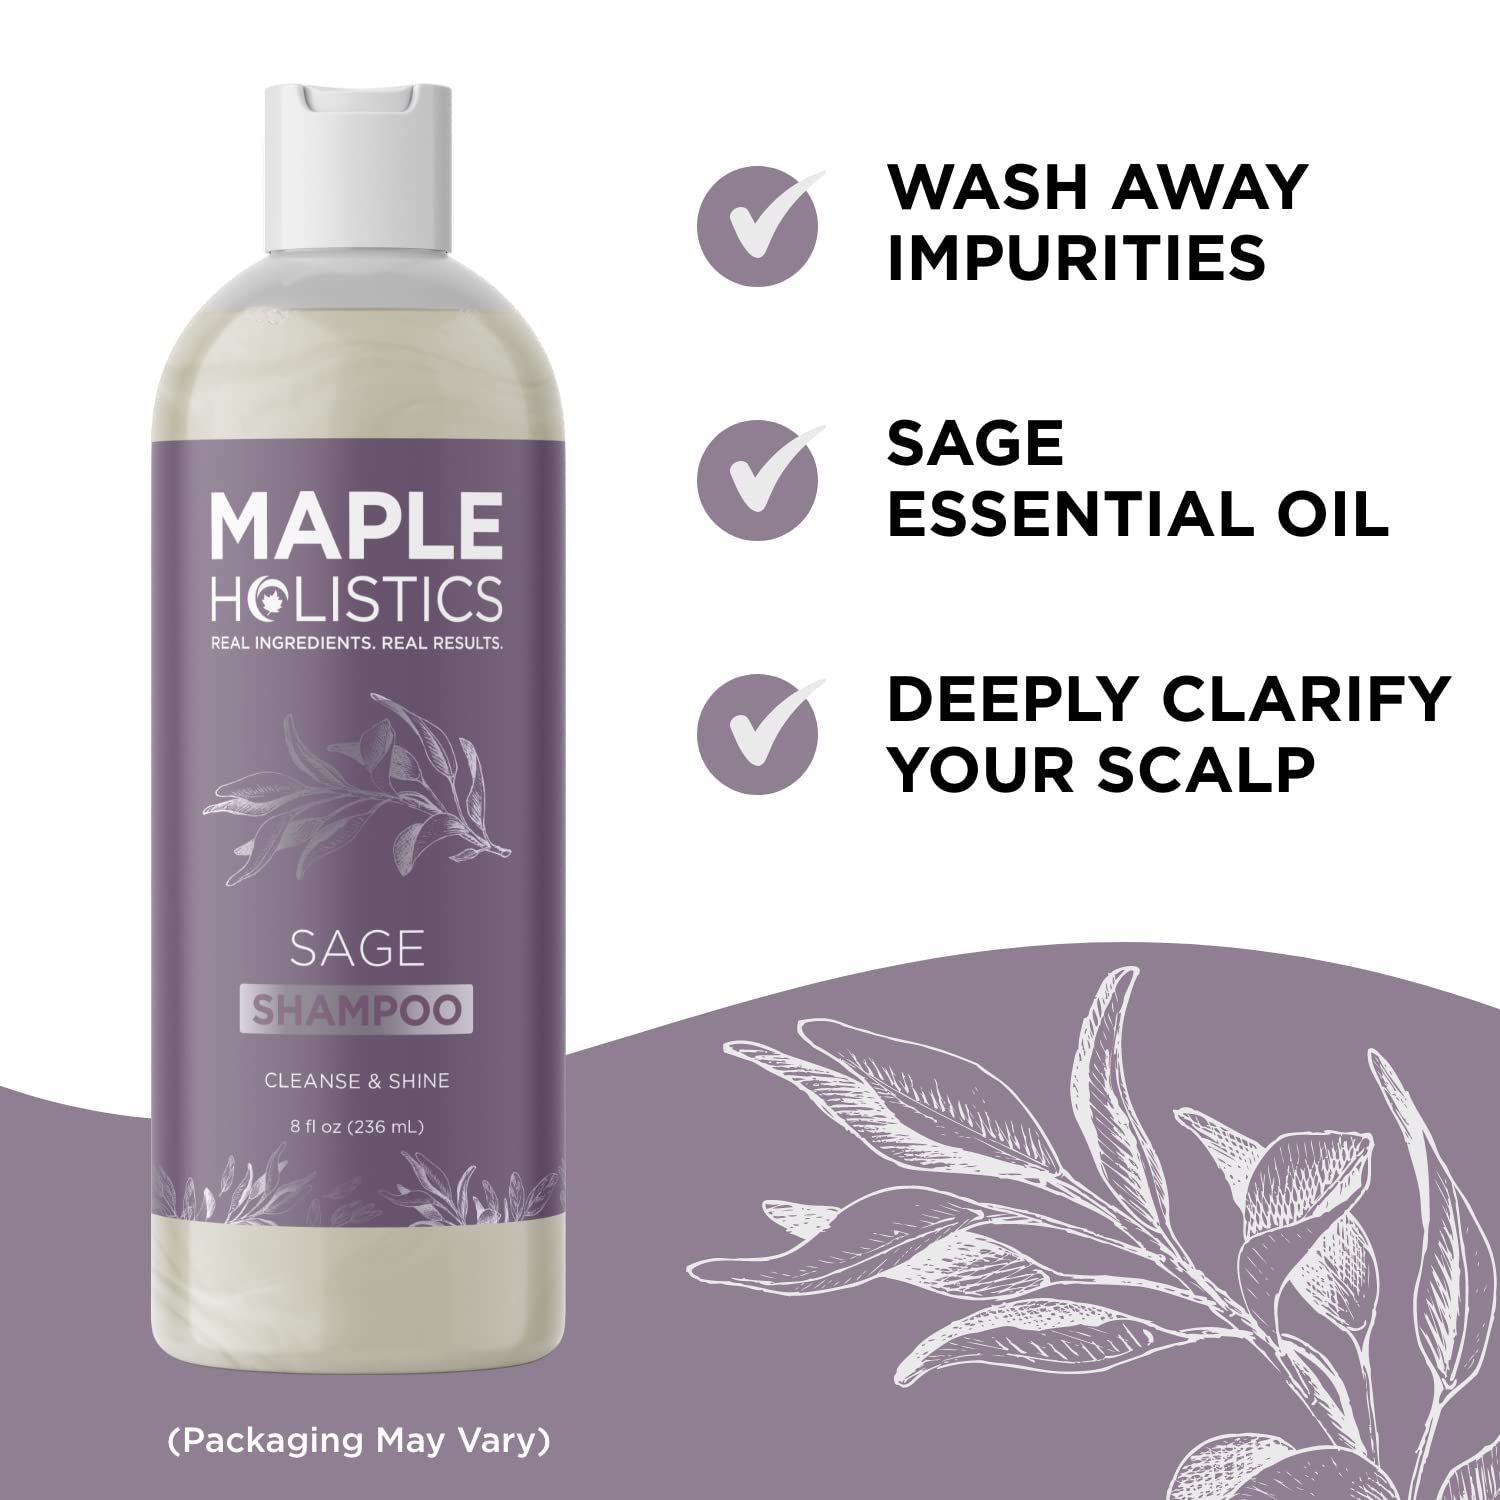 Sage and Rosemary Shampoo Sulfate Free - Sage Oil Clarifying Shampoo for Build Up and Scalp Moisturizer - Oily Hair Shampoo for Greasy Hair and Dry Scalp Treatment with Essential Oils for Hair